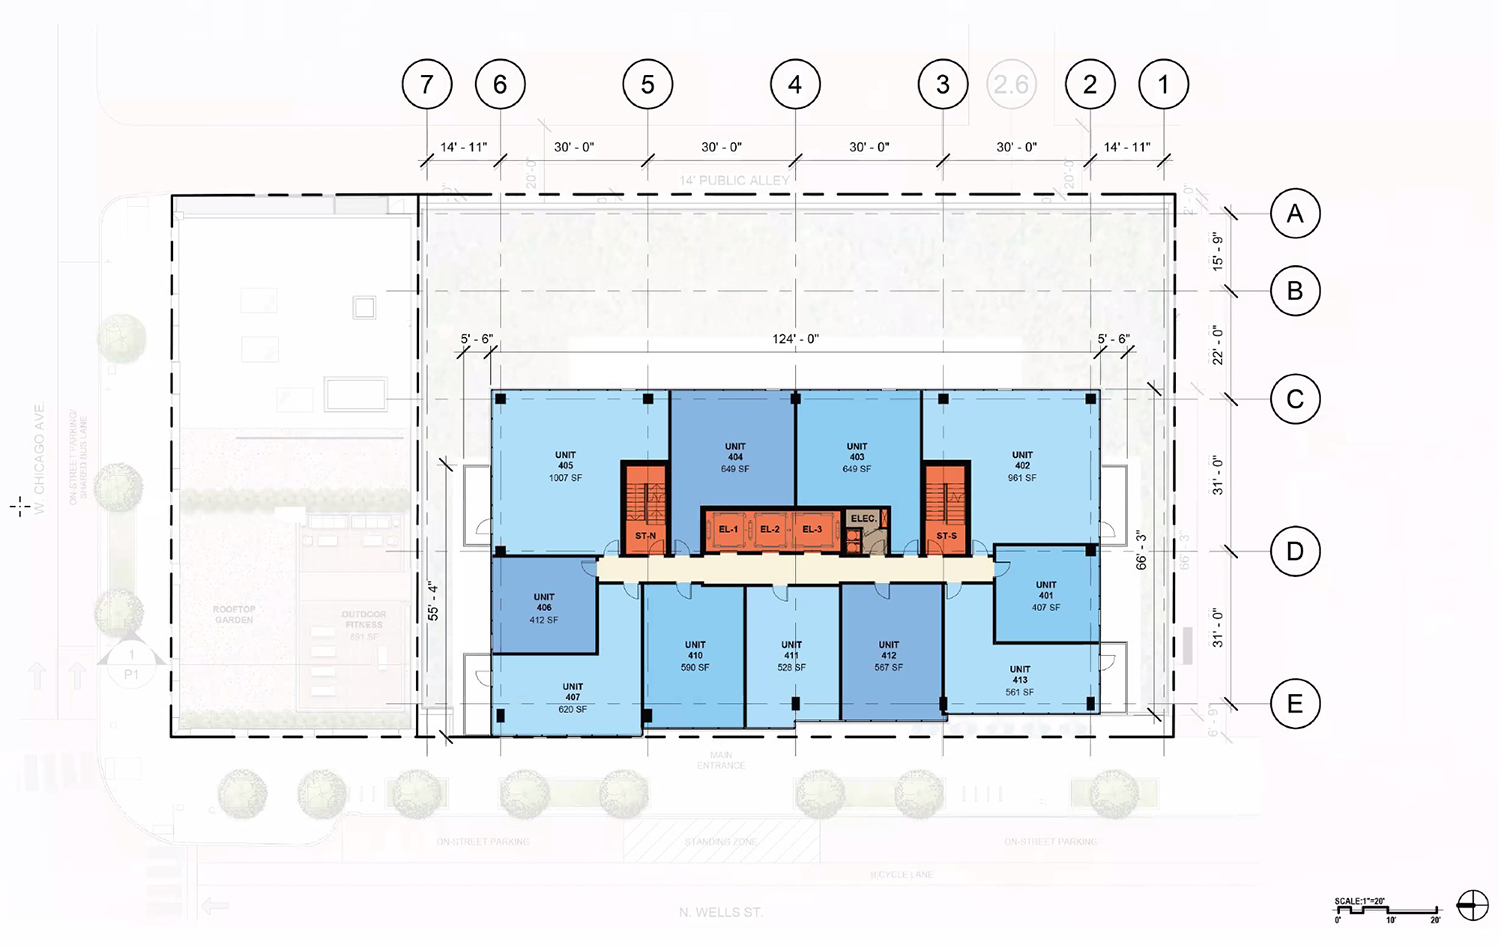 Typical Floor Plan for 741 N Wells Street. Drawing by Antunovich Associates